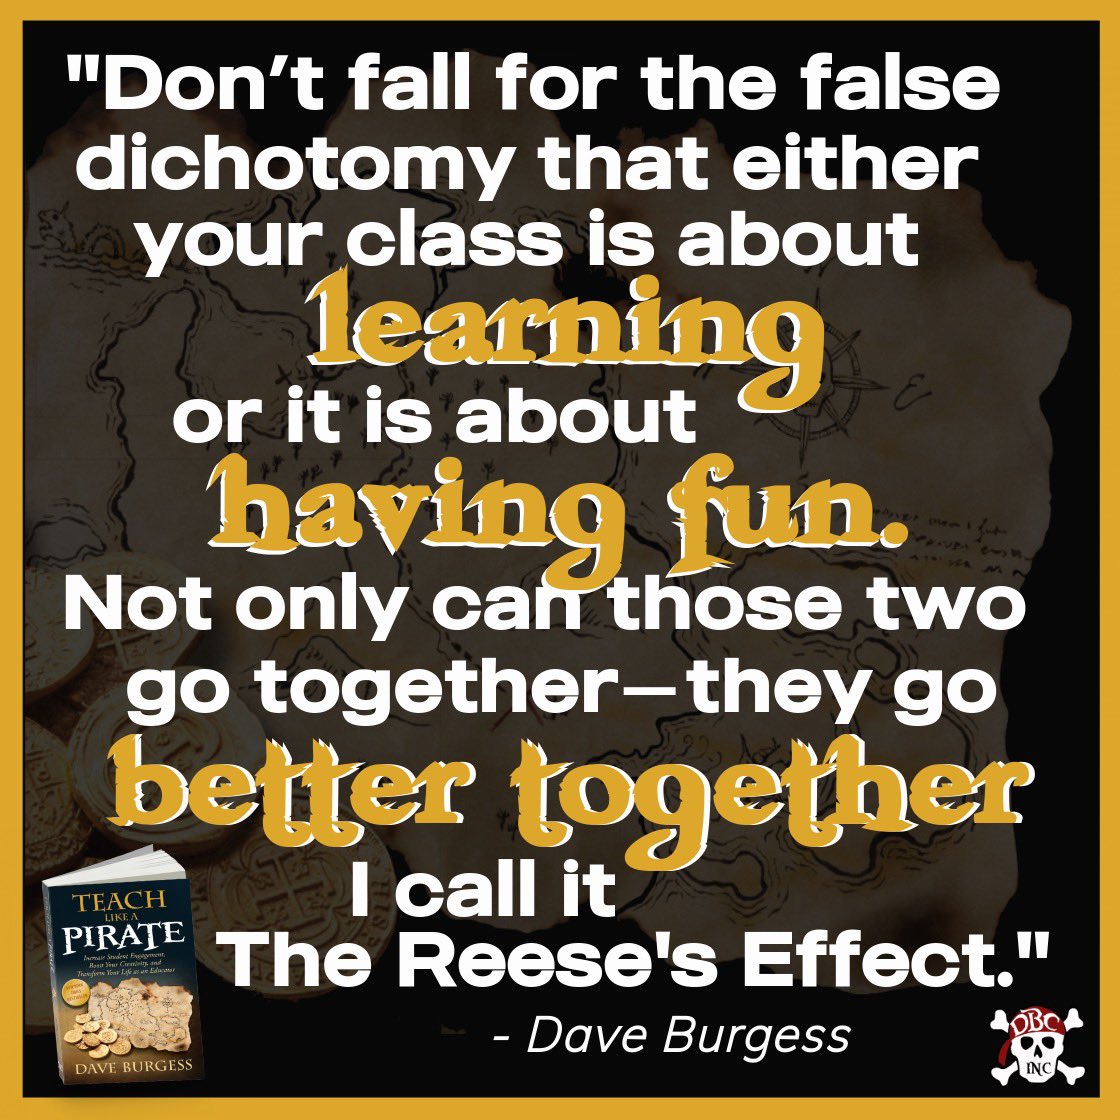 Learning + Fun = Better

It's a simple equation...but the implications are profound! 

Don't fall for the false dichotomy! 
The best classes have BOTH!

This from the pages of #tlap. 
#NaysayerCollection #leadlap #dbcincbooks 
a.co/d/5z4wK5w